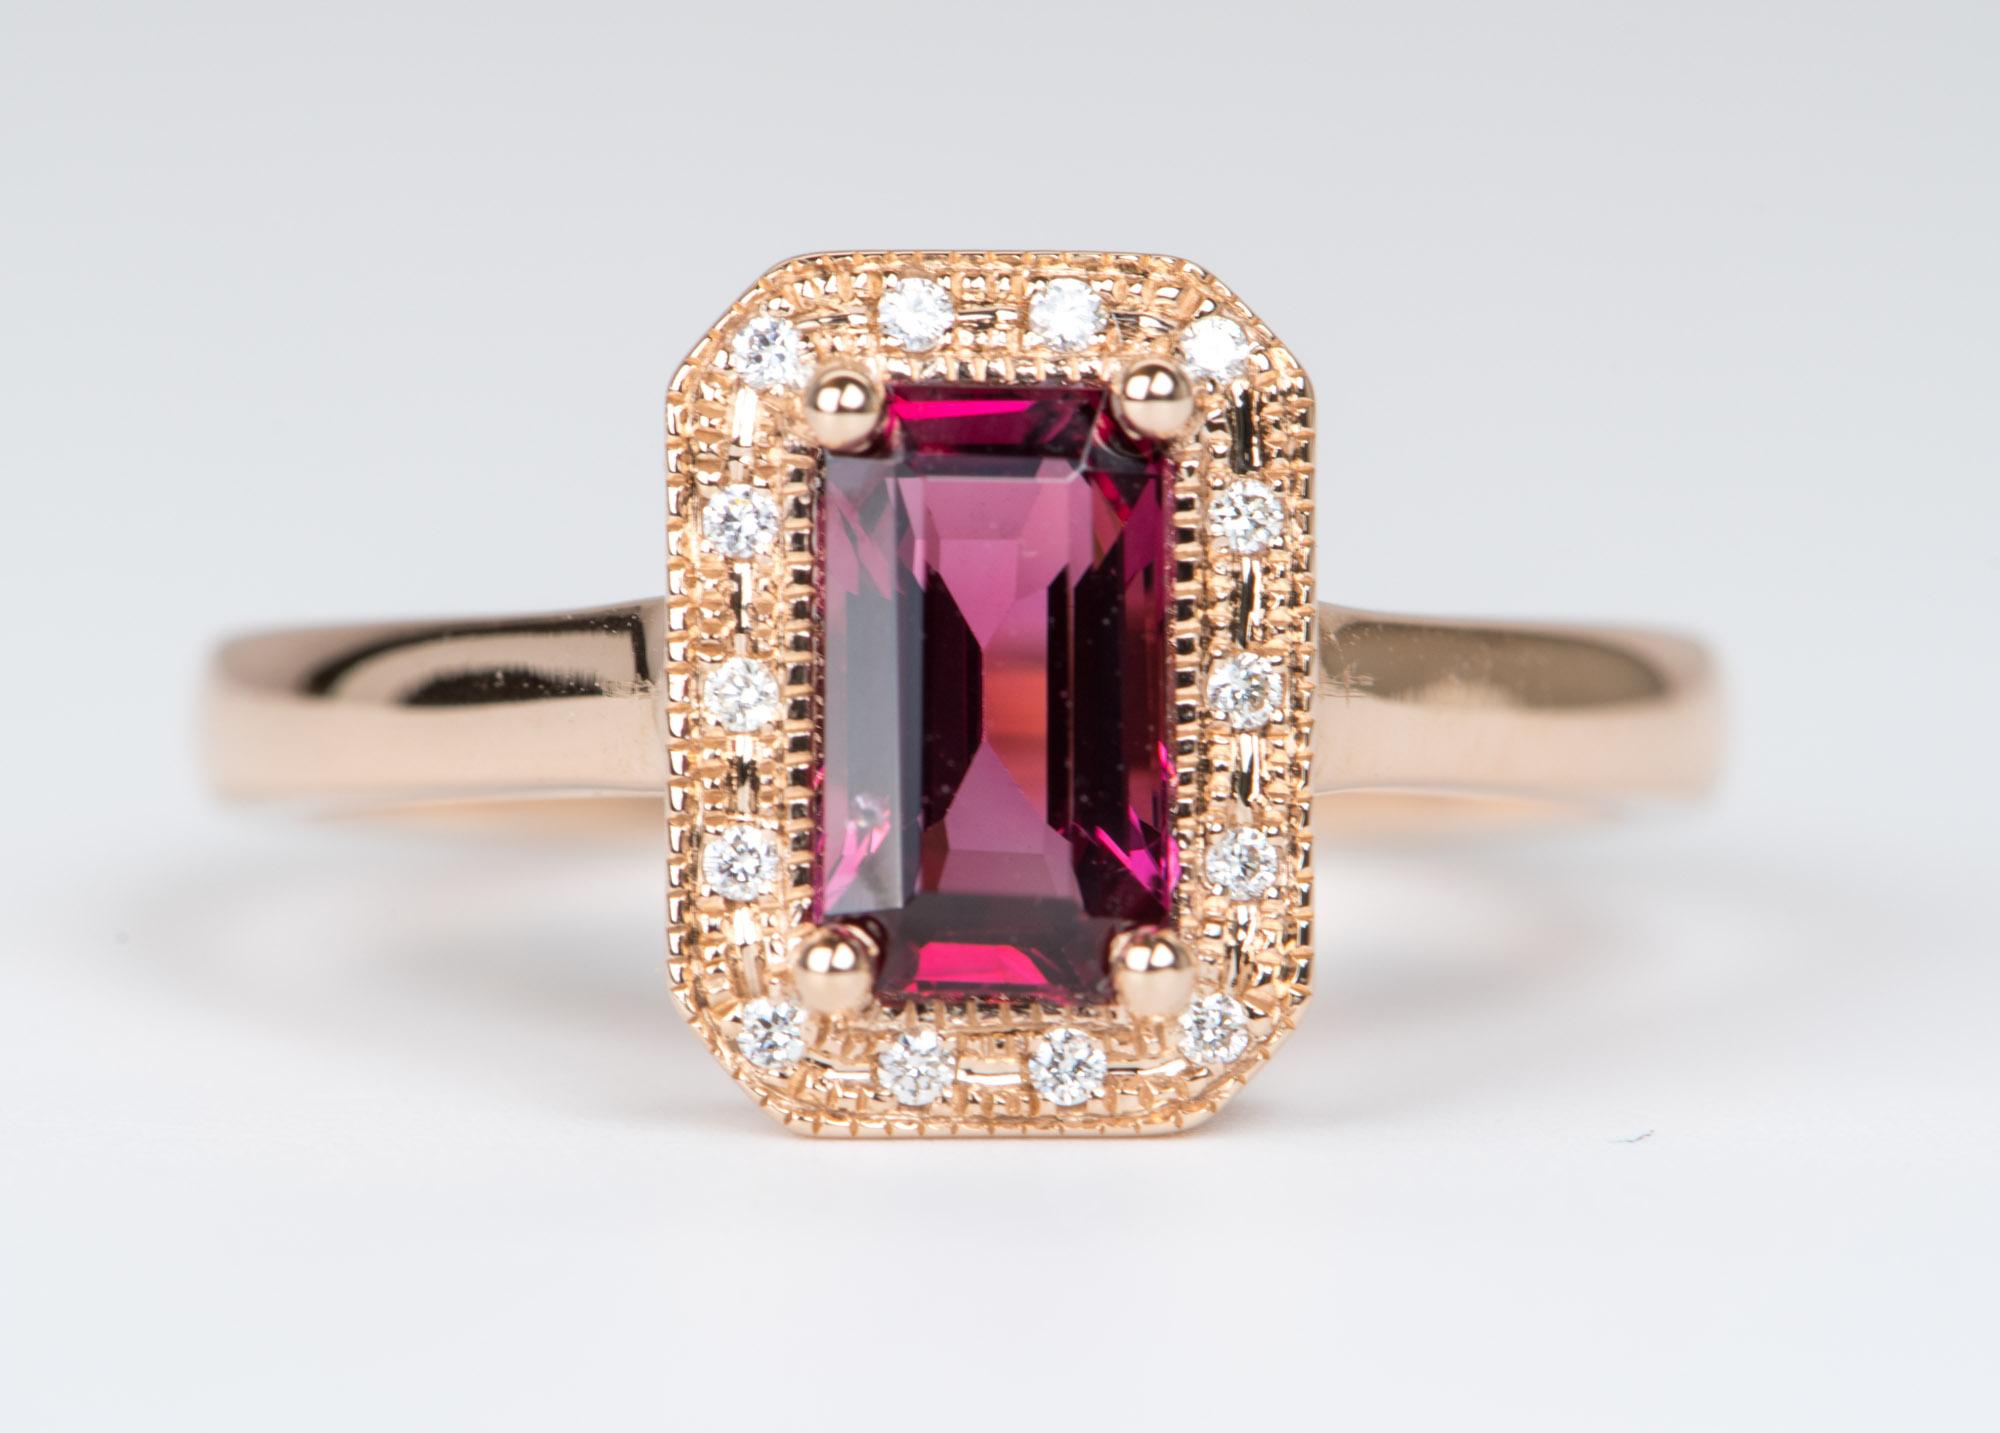 ♥  This is a solid 14k rose gold ring set with an emerald-cut deep fire red spinel in the center, flanked by a textured diamond halo. 
♥  The overall setting measures 8.5mm in width, 10.9mm in length, and sits 4.8mm tall from the finger

♥  Ring